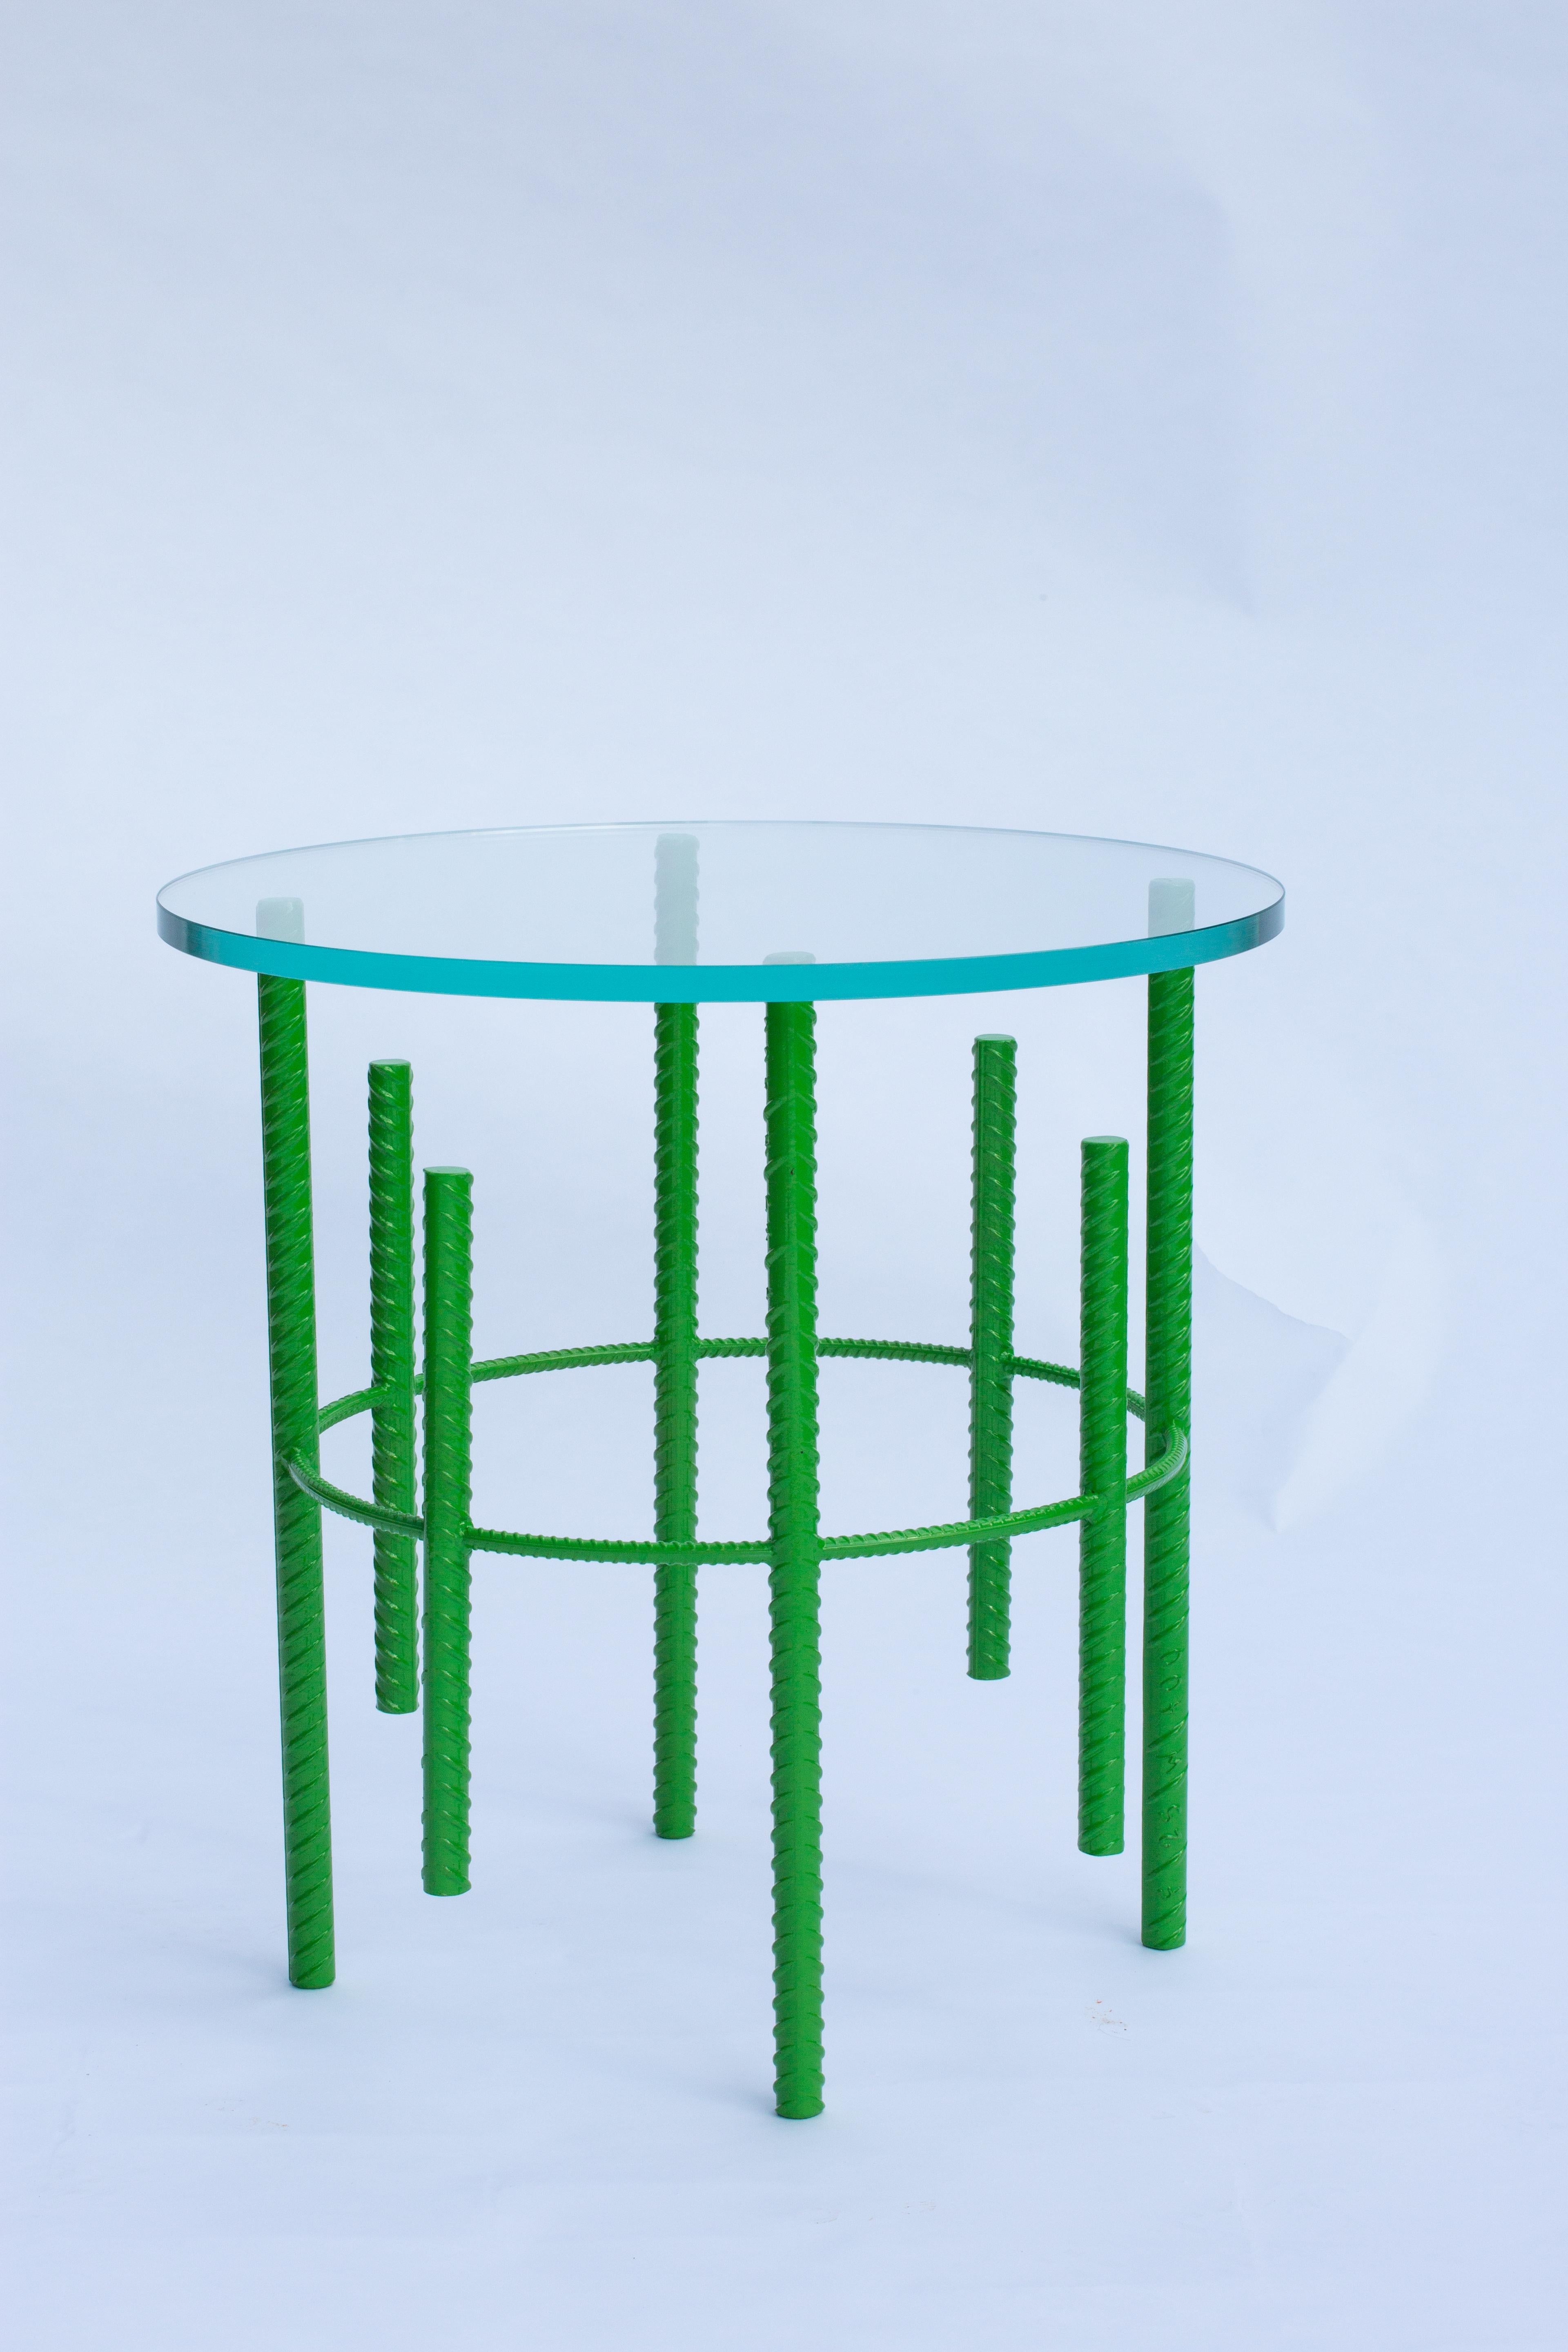 Handcrafted by Troy Smith from Troy Smith Studio. The base is made from one-inch construction rebar and carefully welded together to form a sputnik space-like form. The base is powder coated in lime green. (Custom colour options are available on